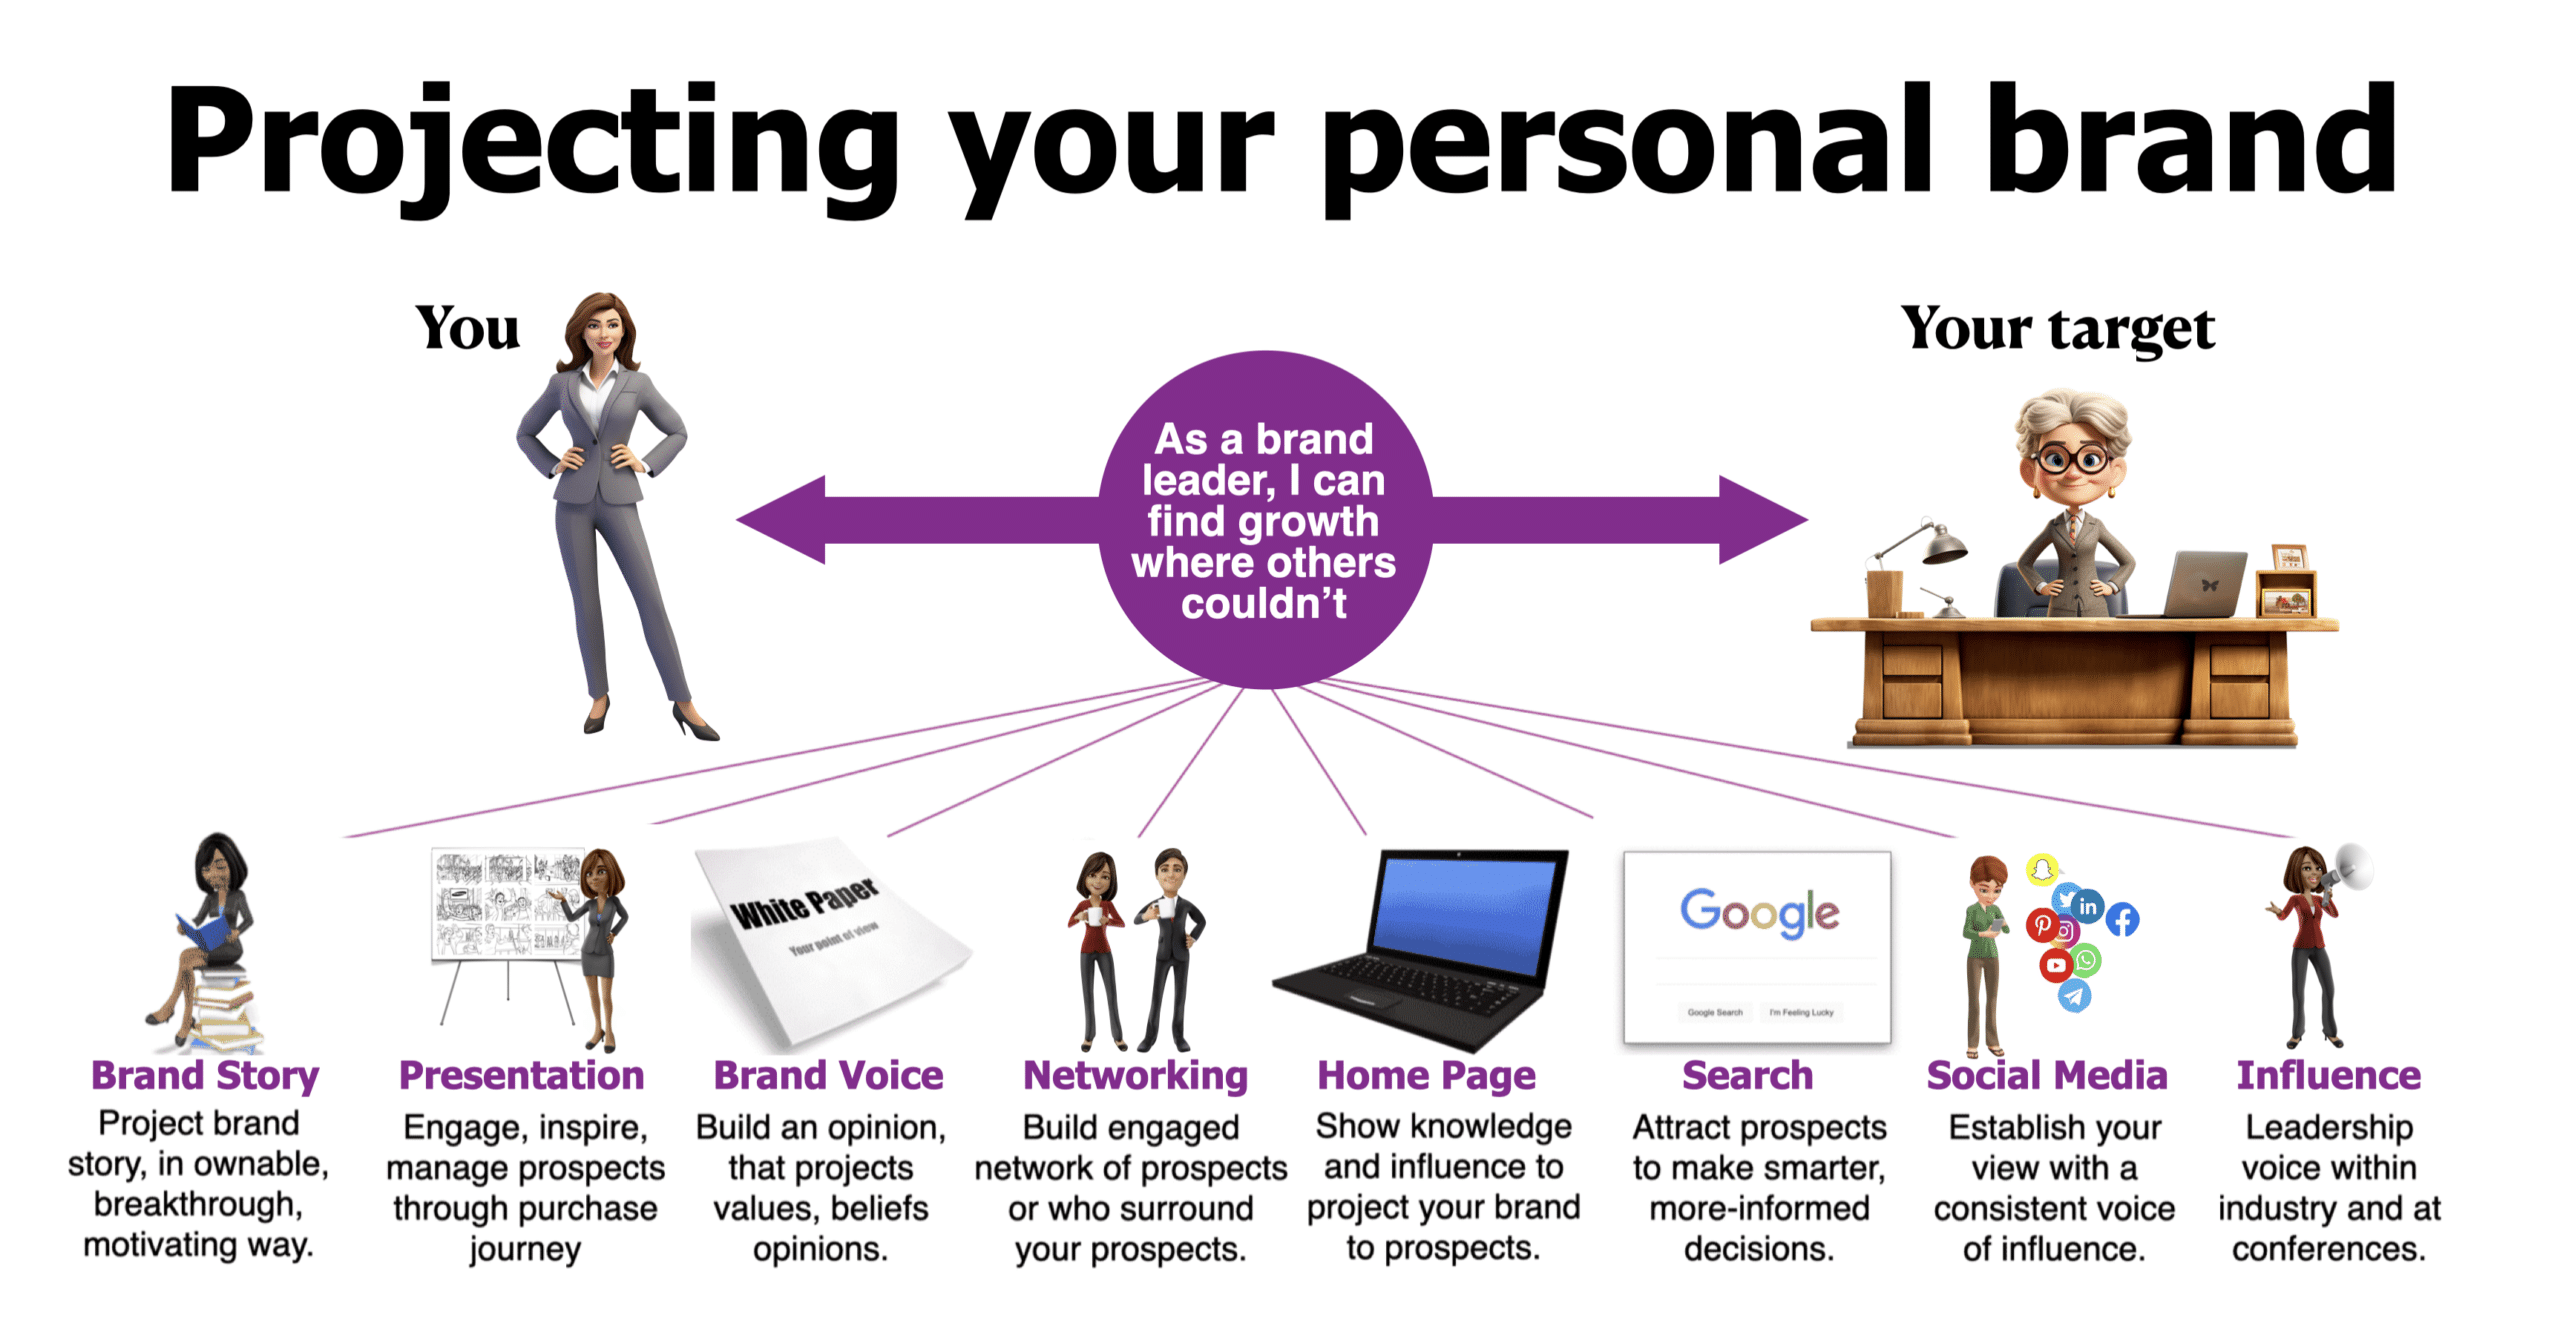 Projecting your personal brand